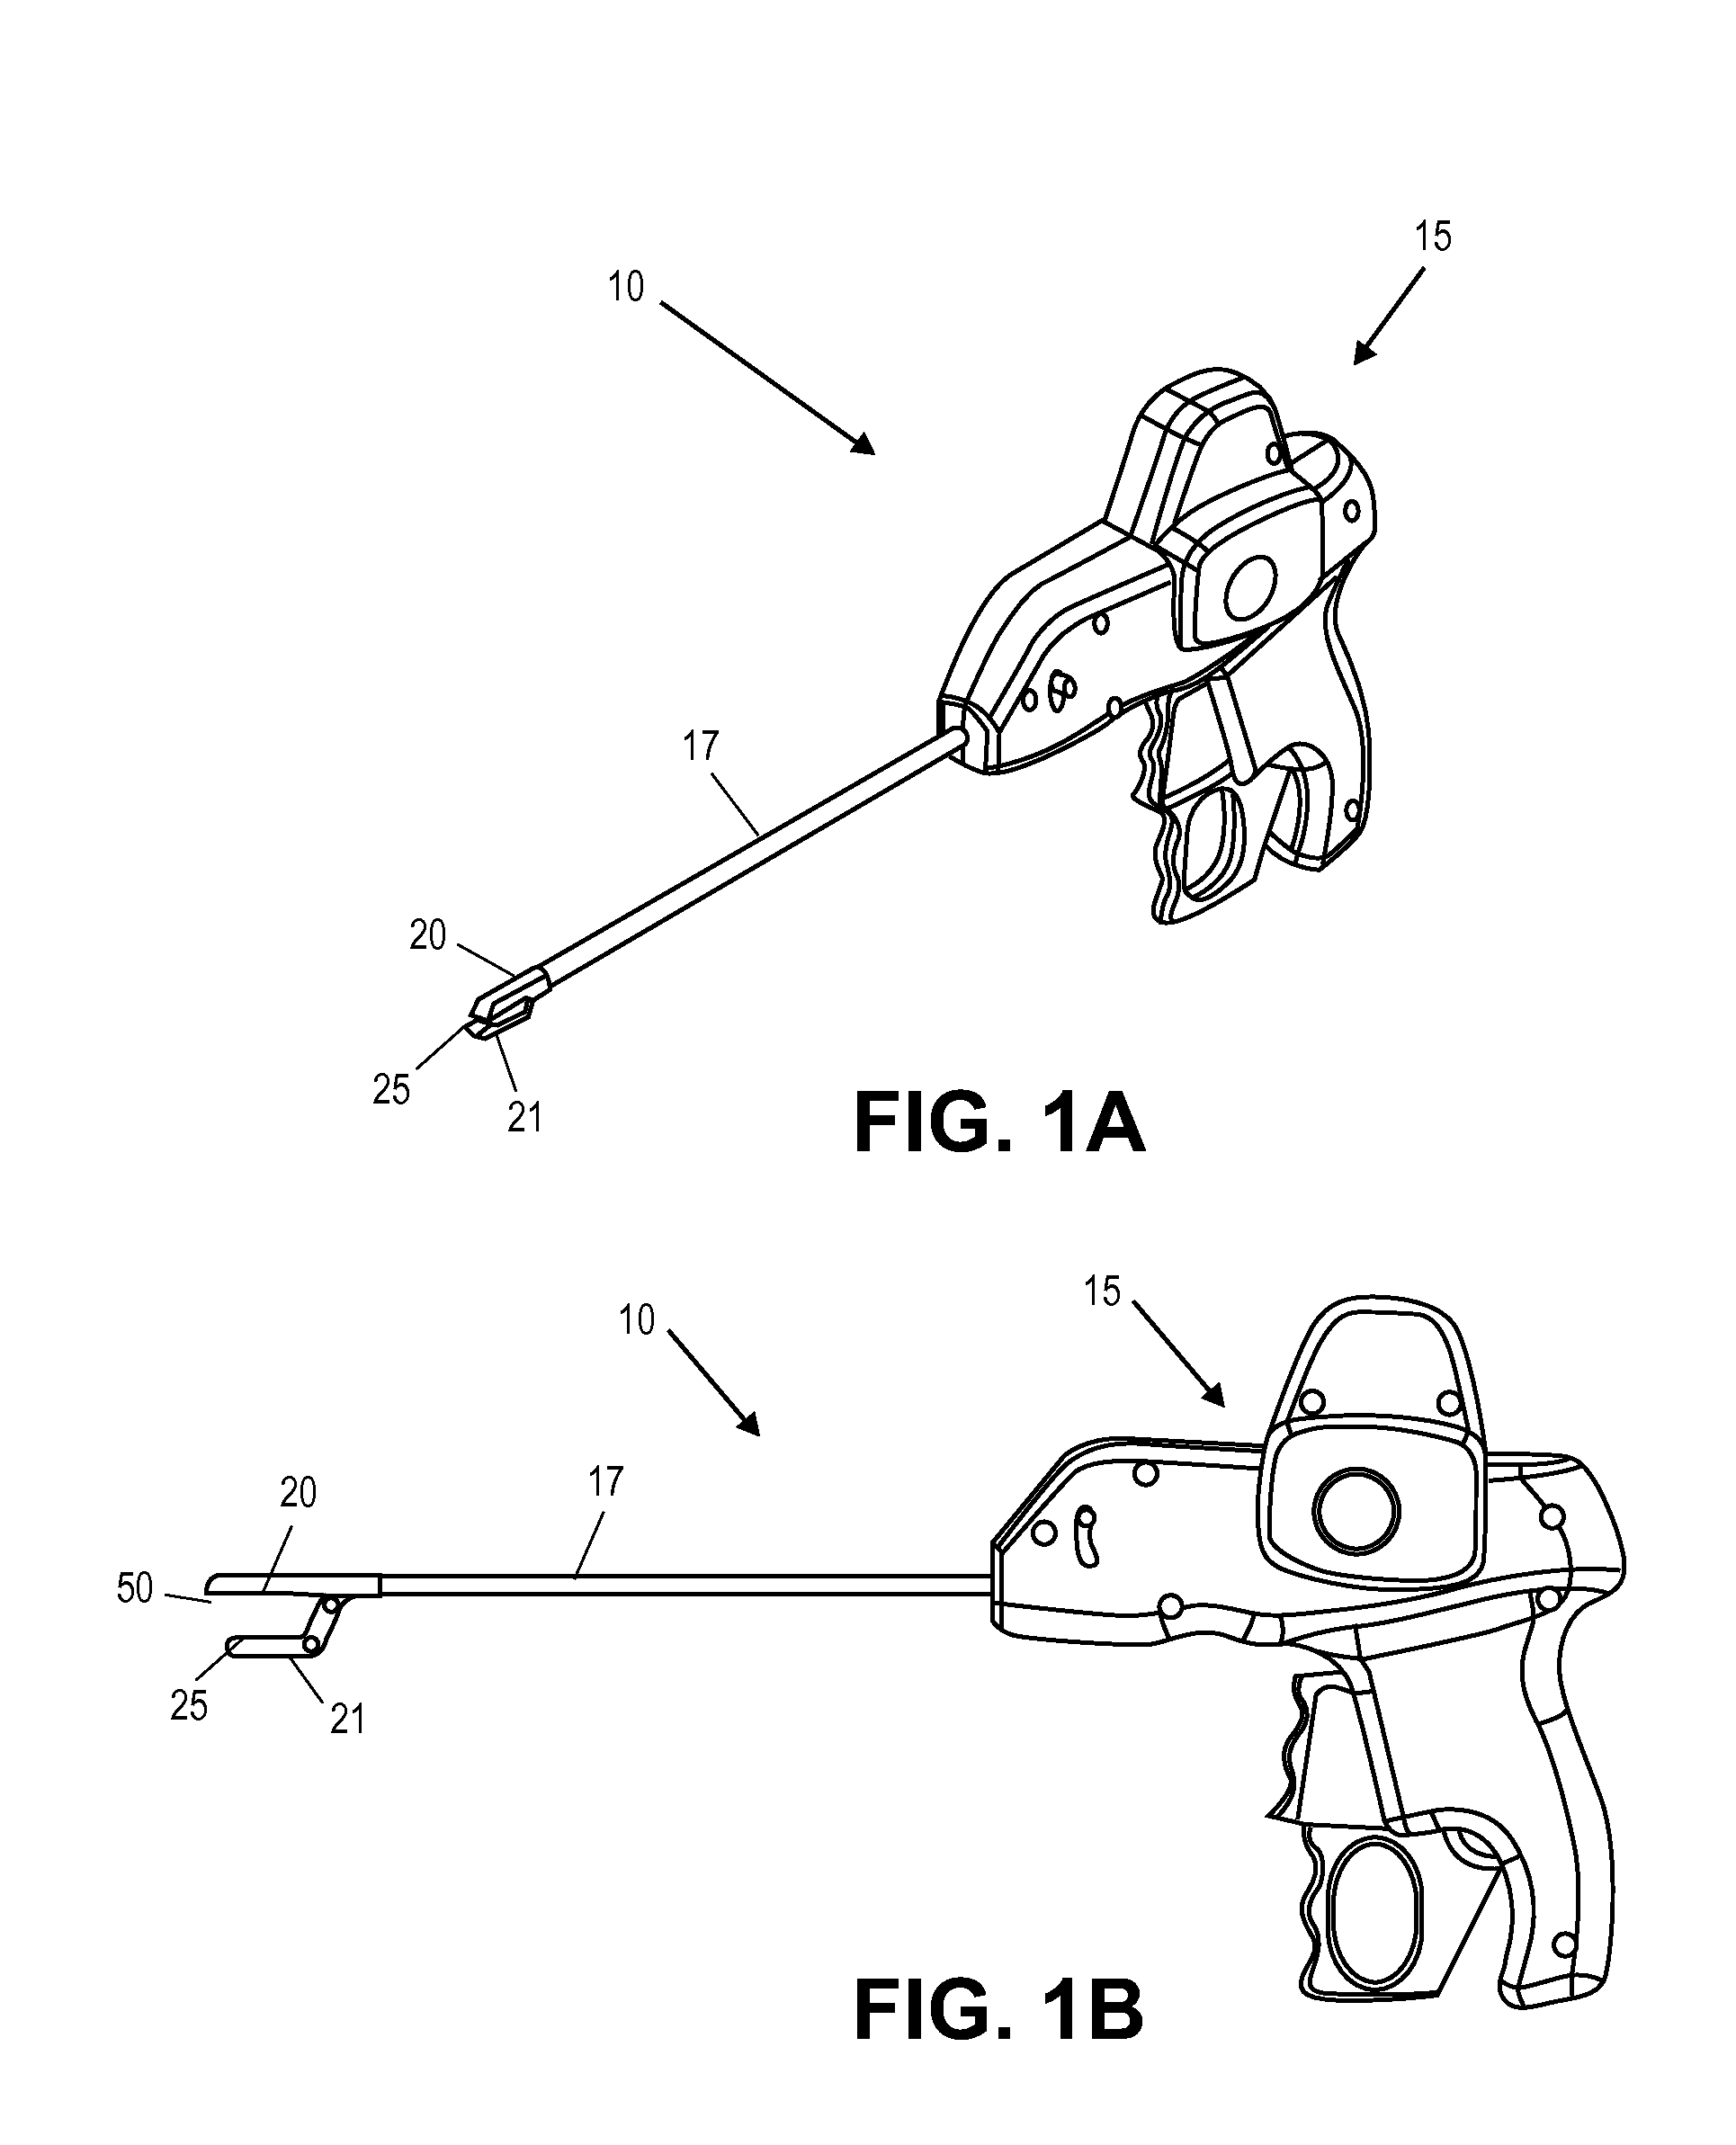 Methods of suturing and repairing tissue using a continuous suture passer device